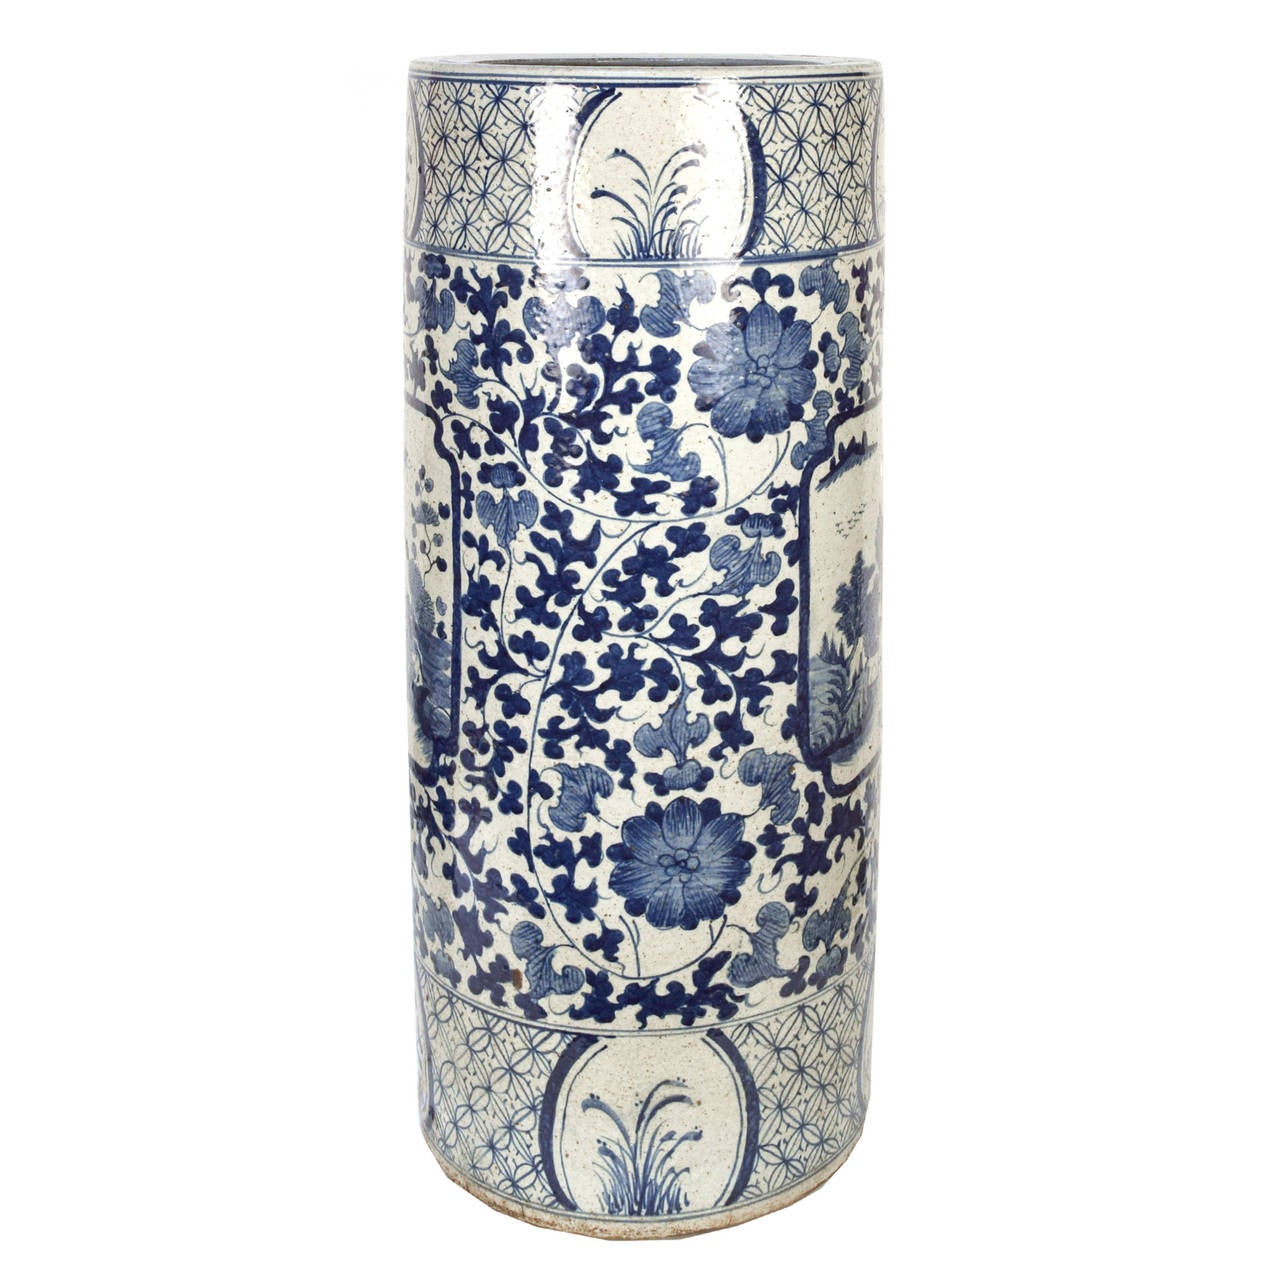 20th Century Chinese Blue and White Umbrella Containers